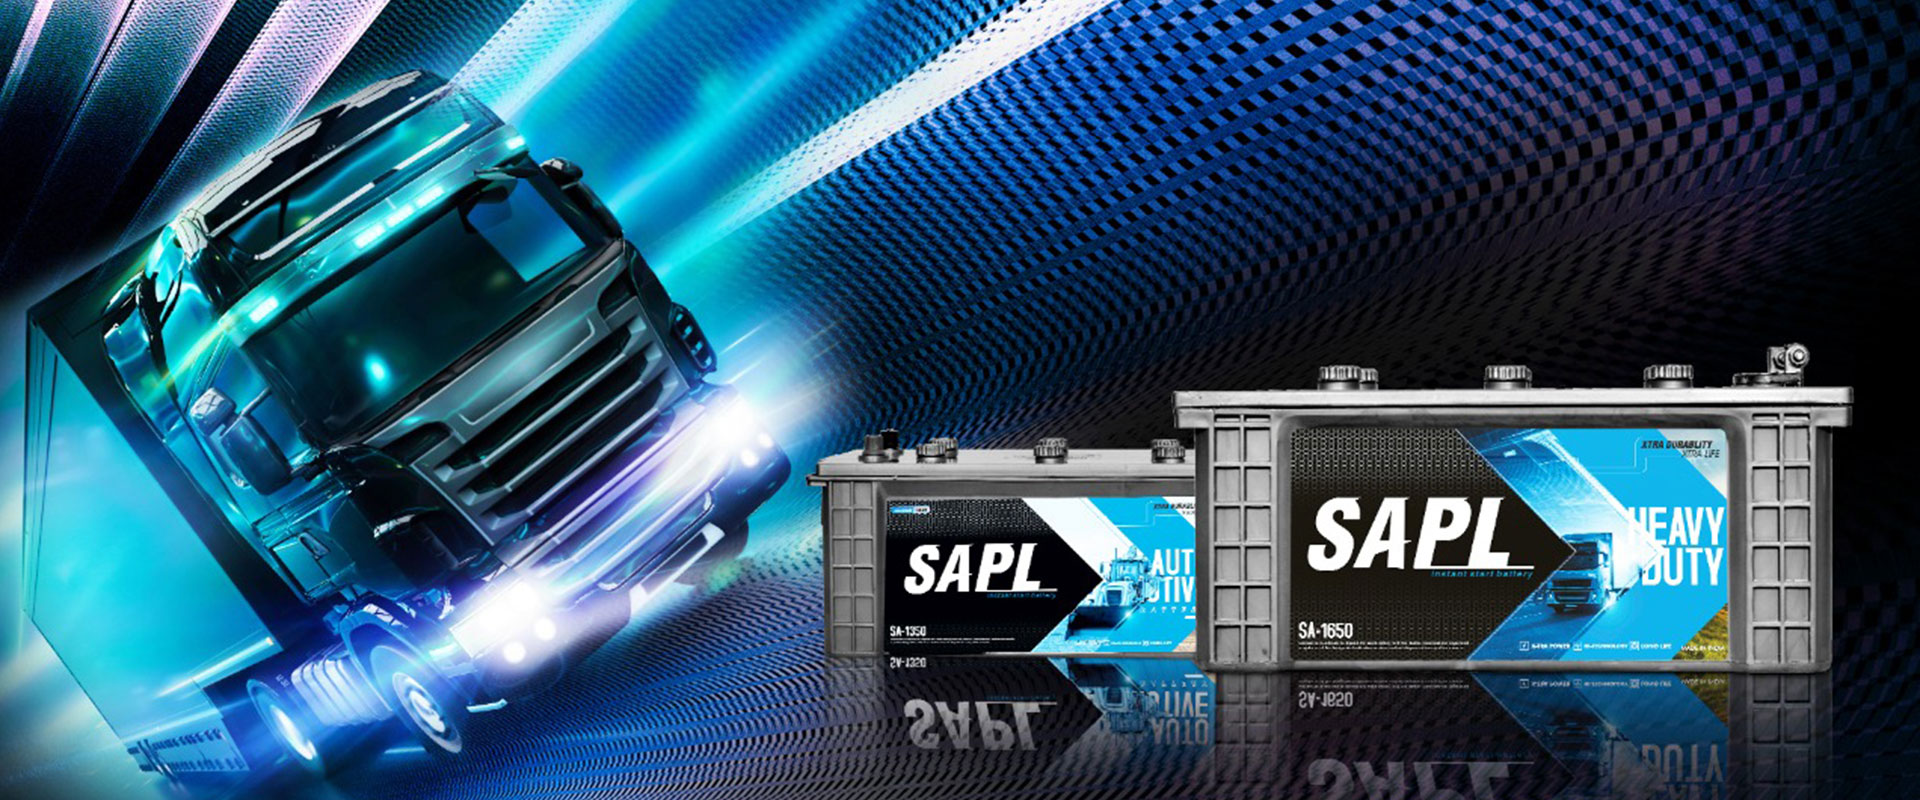 Guide to Buying the Perfect Car Battery Online